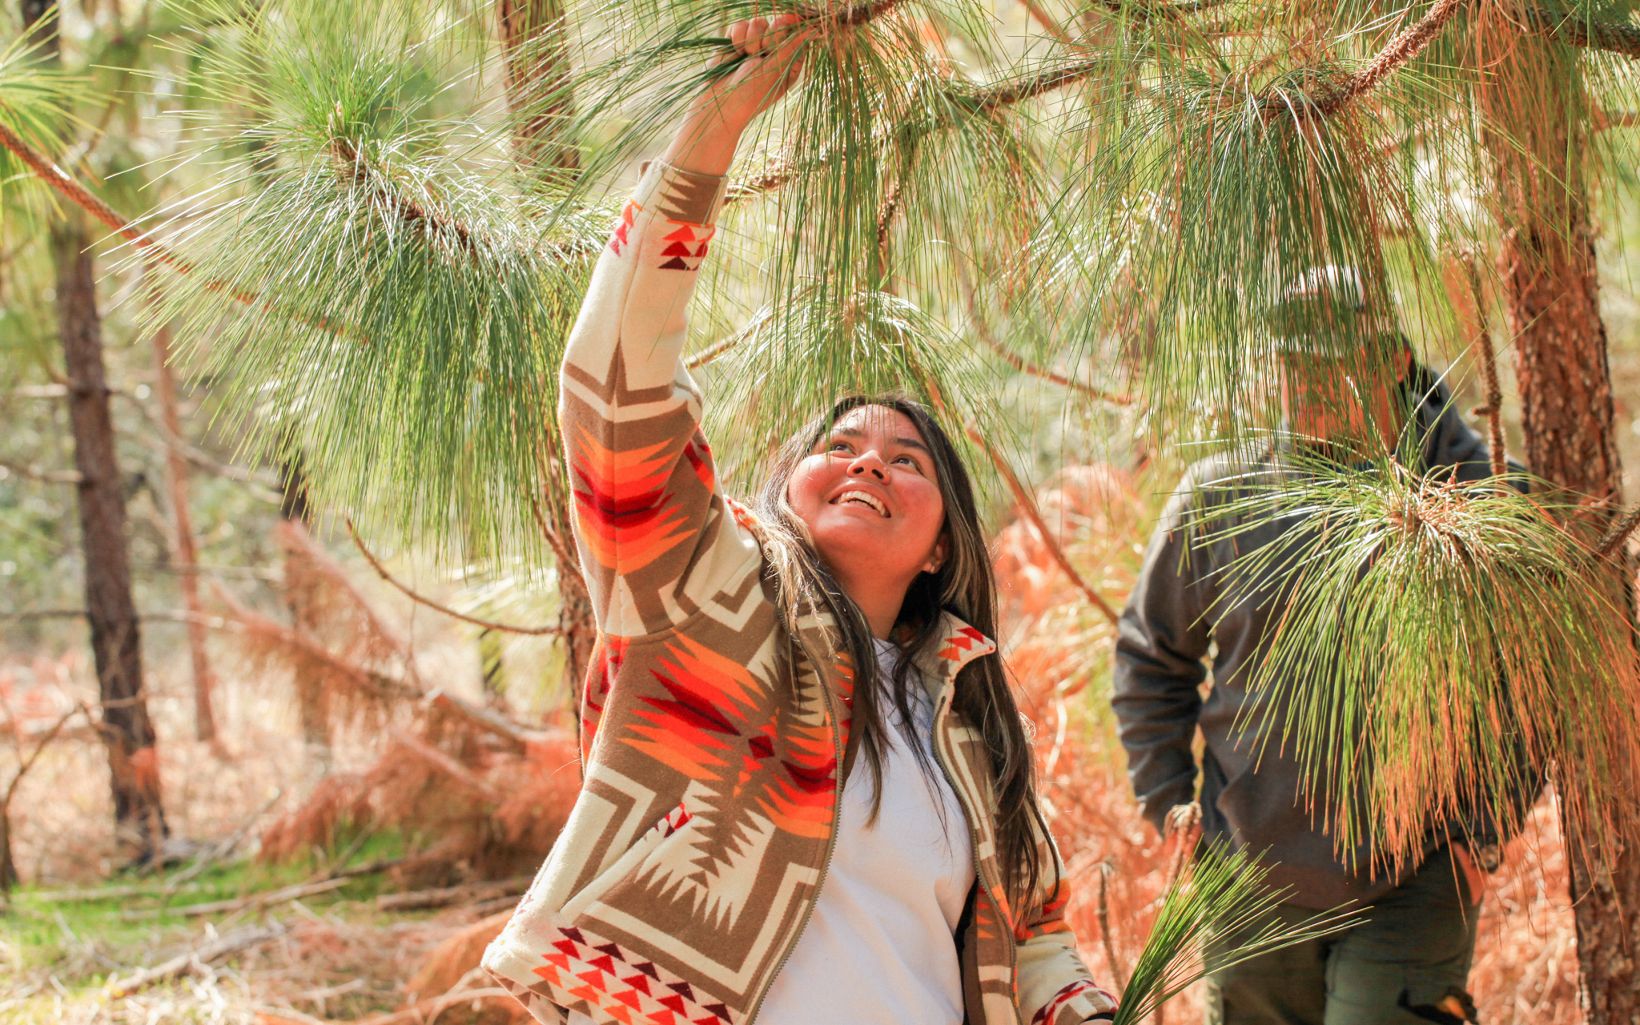 Charity Battise smiles widely as she pulls longleaf needles from a tree with her right hand outstretched. Another harvester stands in the background observing her.